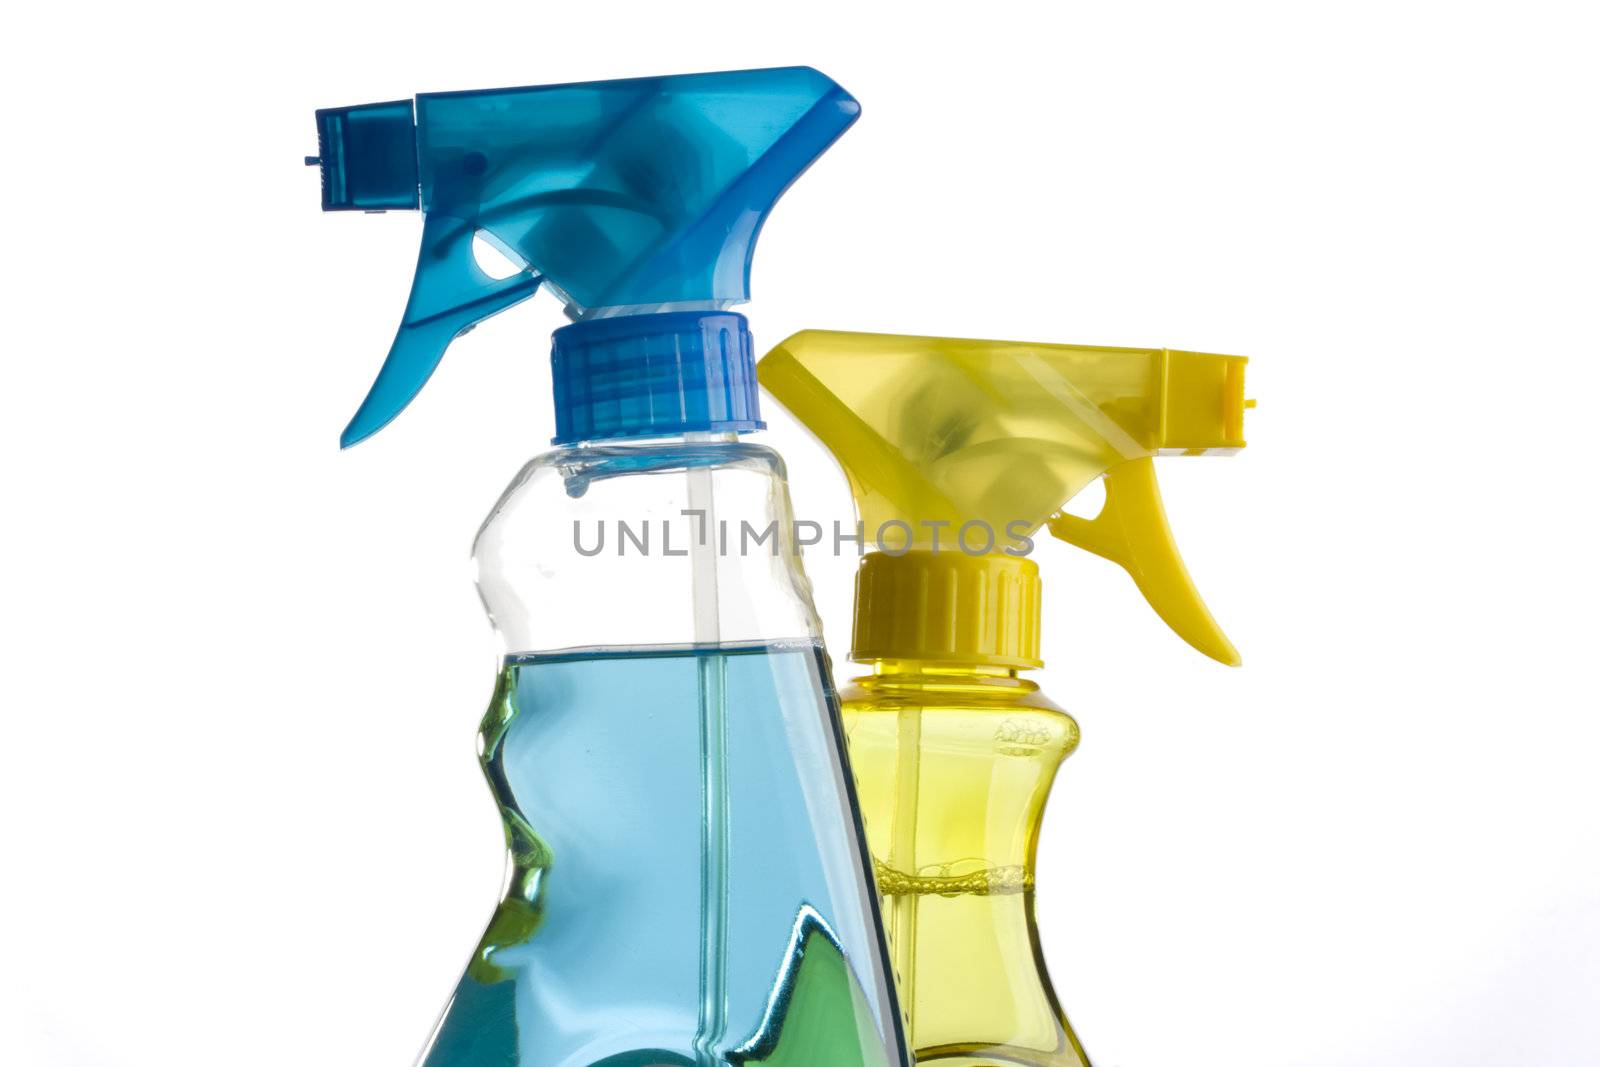 blue and yellow trigger spray bottles by bernjuer